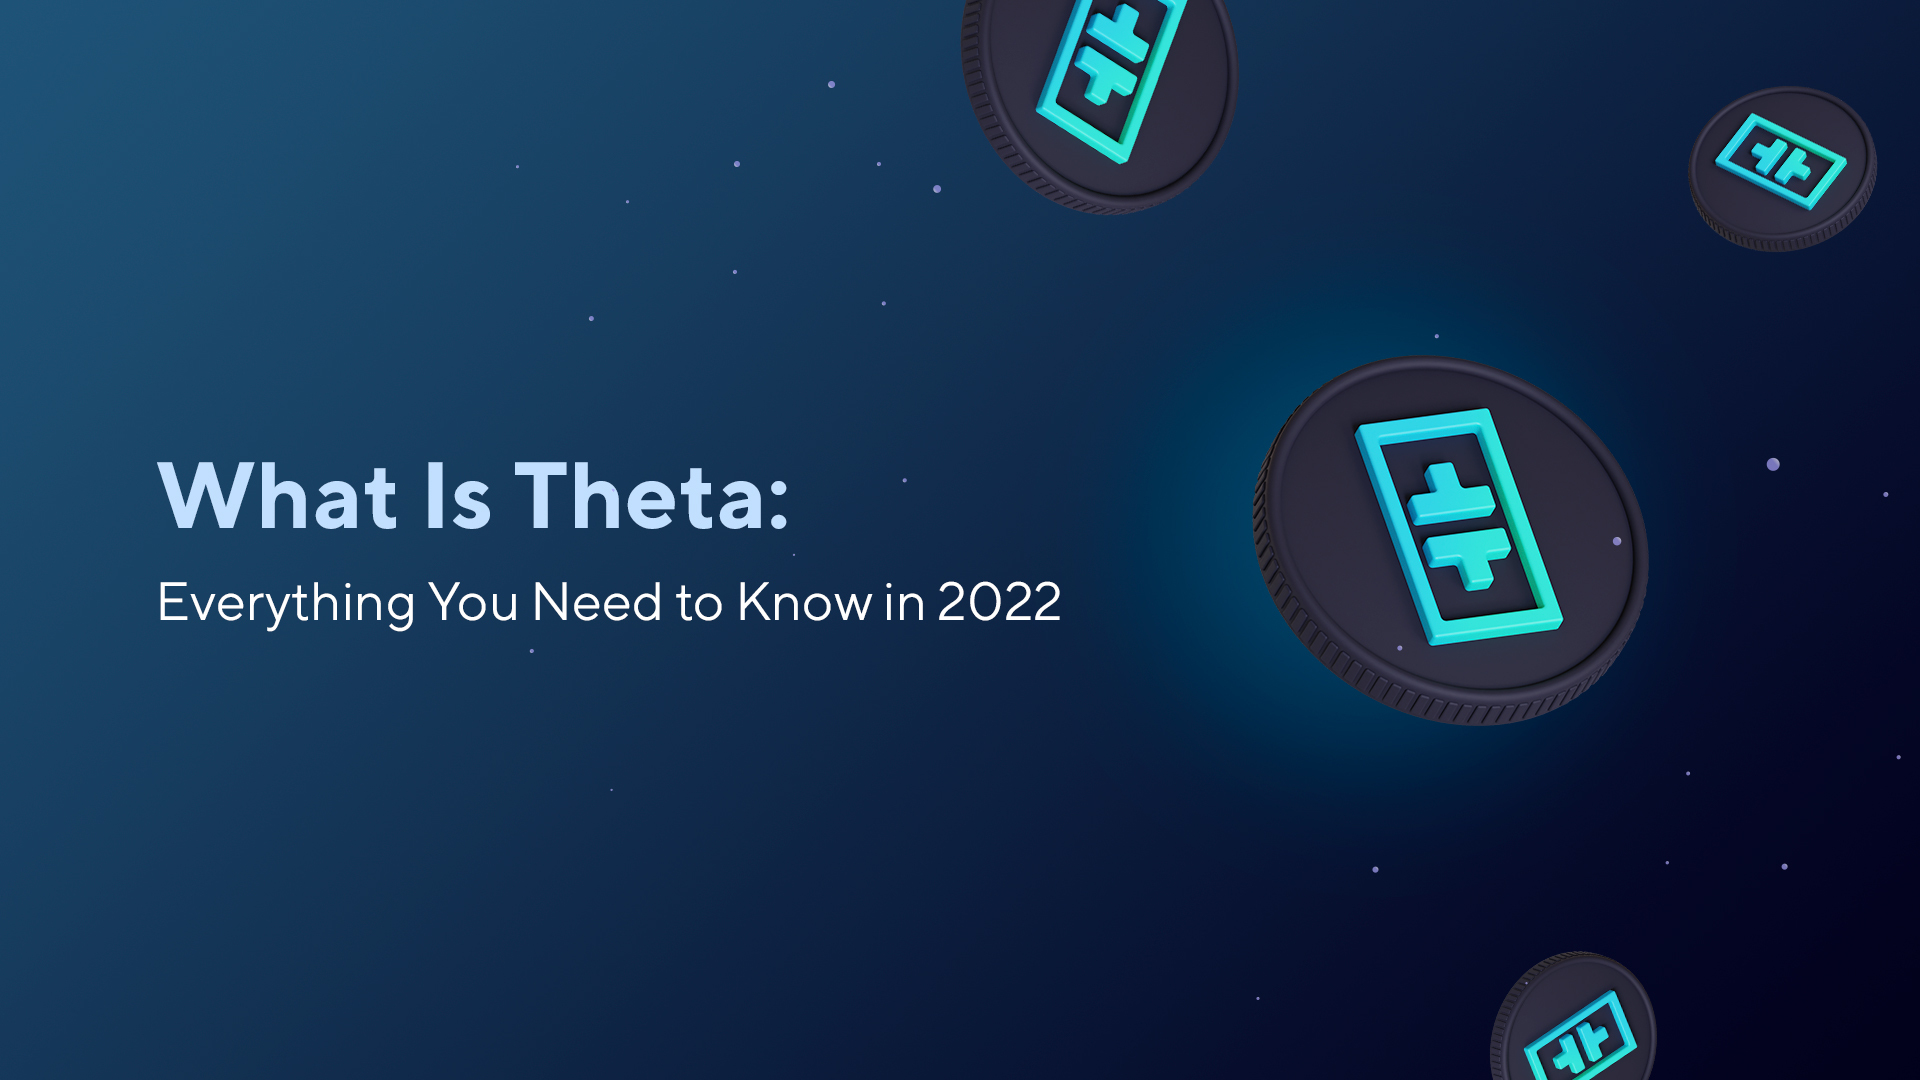 What Is Theta (THETA): Everything You Need to Know 2022